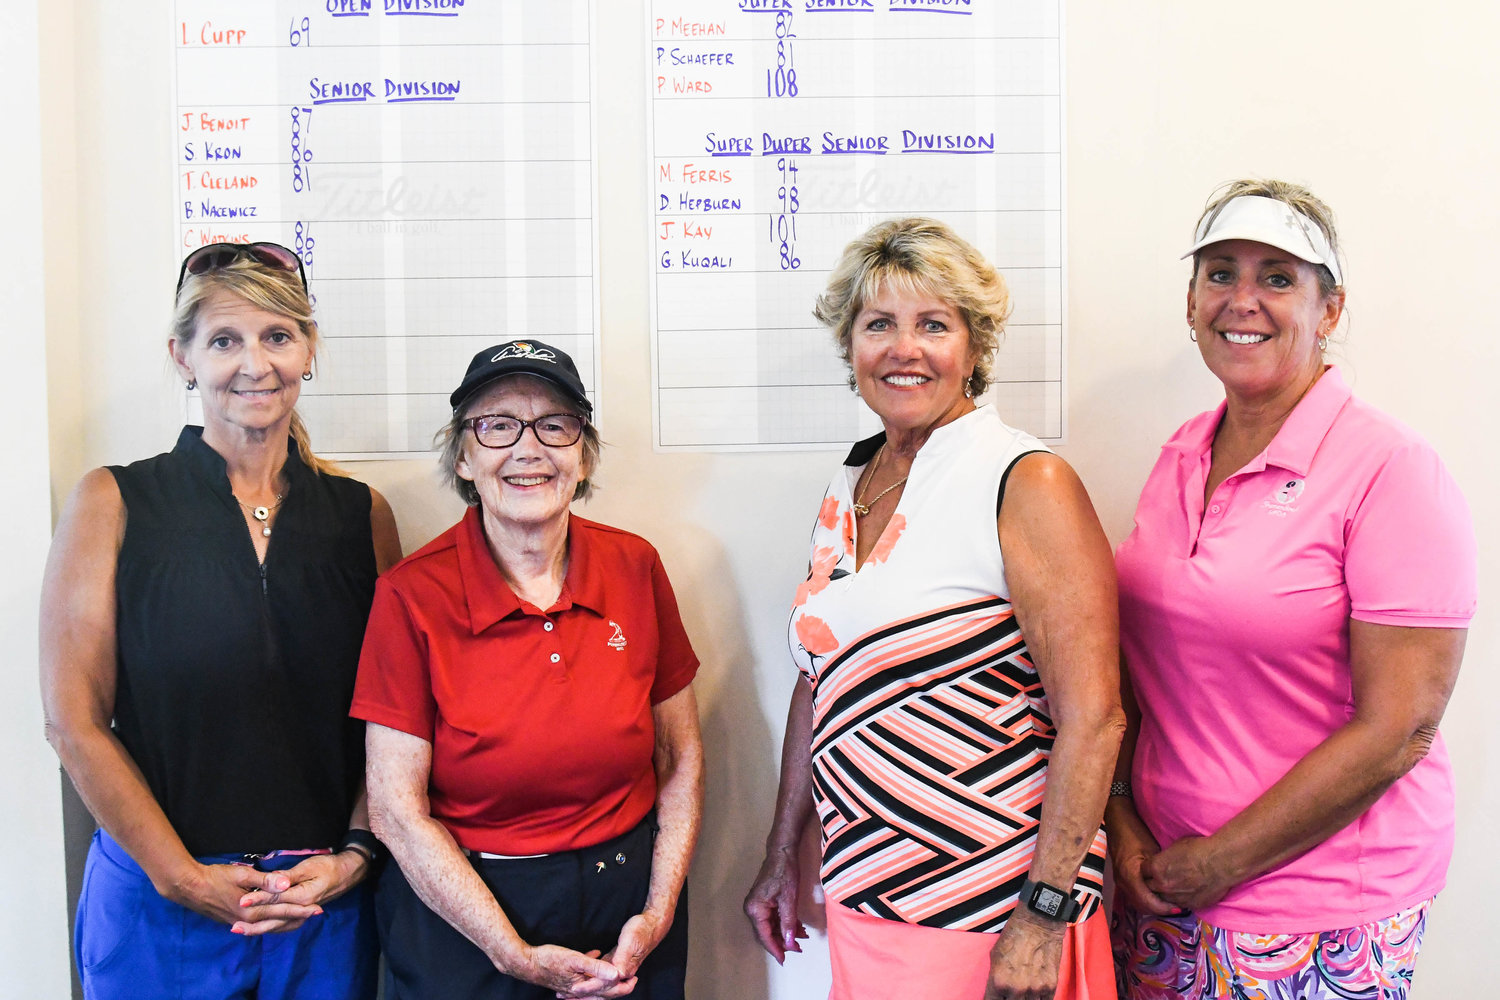 There were 16 participants in the 53rd Rome City Women’s Amateur Golf Championship Monday at Rome Country Club. They included, from left: Barb Nacewicz, Debby Hepburn, Grace Kuqali and Erin Byrnes-Hammond. Kuqali’s 86 was best in the super duper senior division.